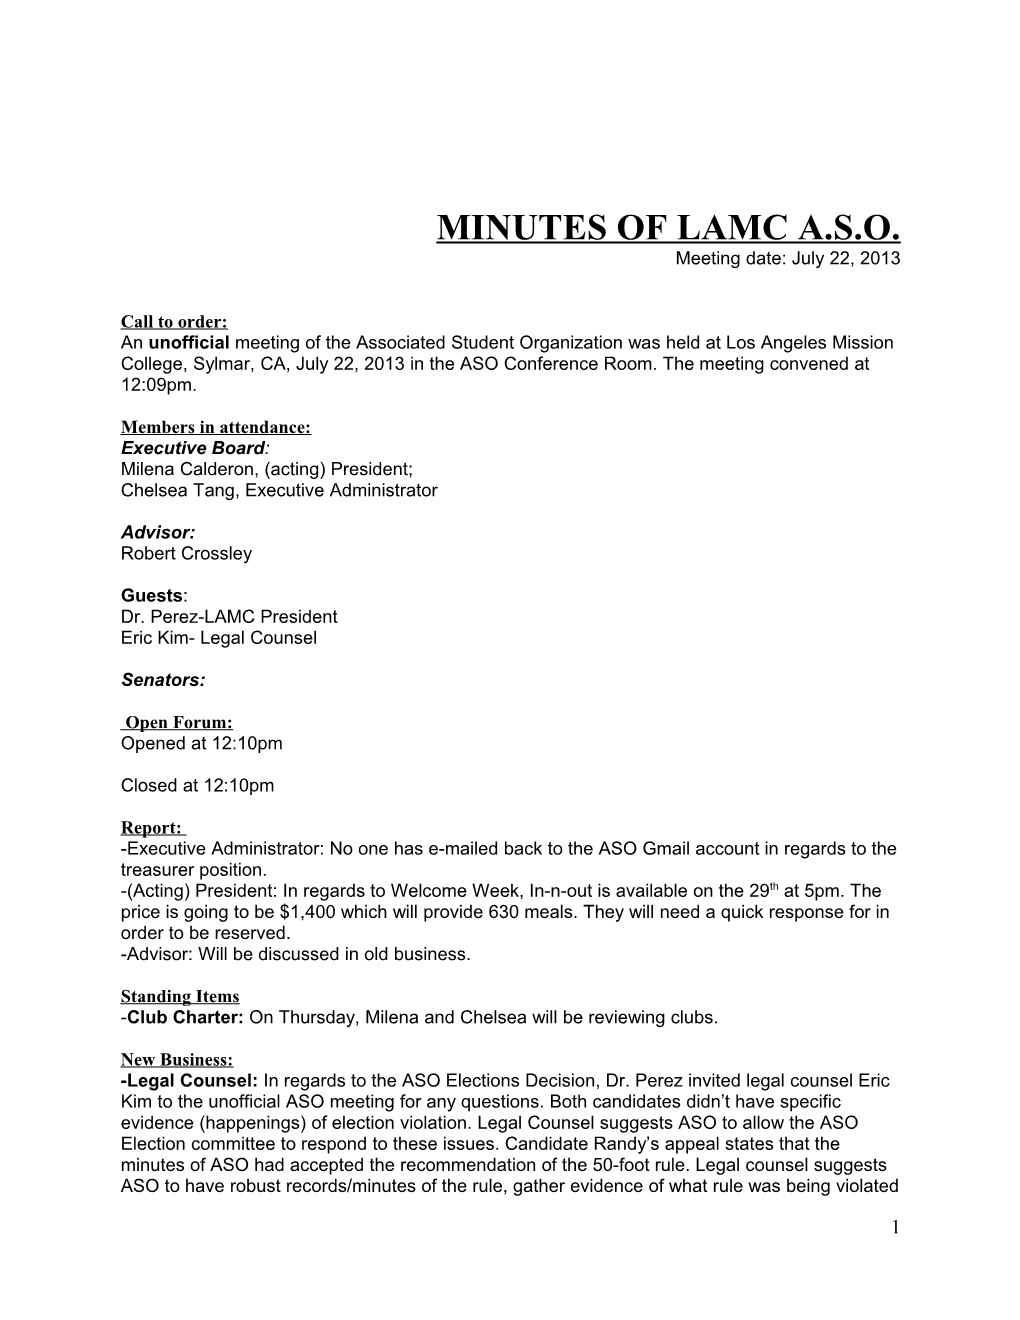 MINUTES of LAMC A.S.O. Meeting Date: July 22, 2013